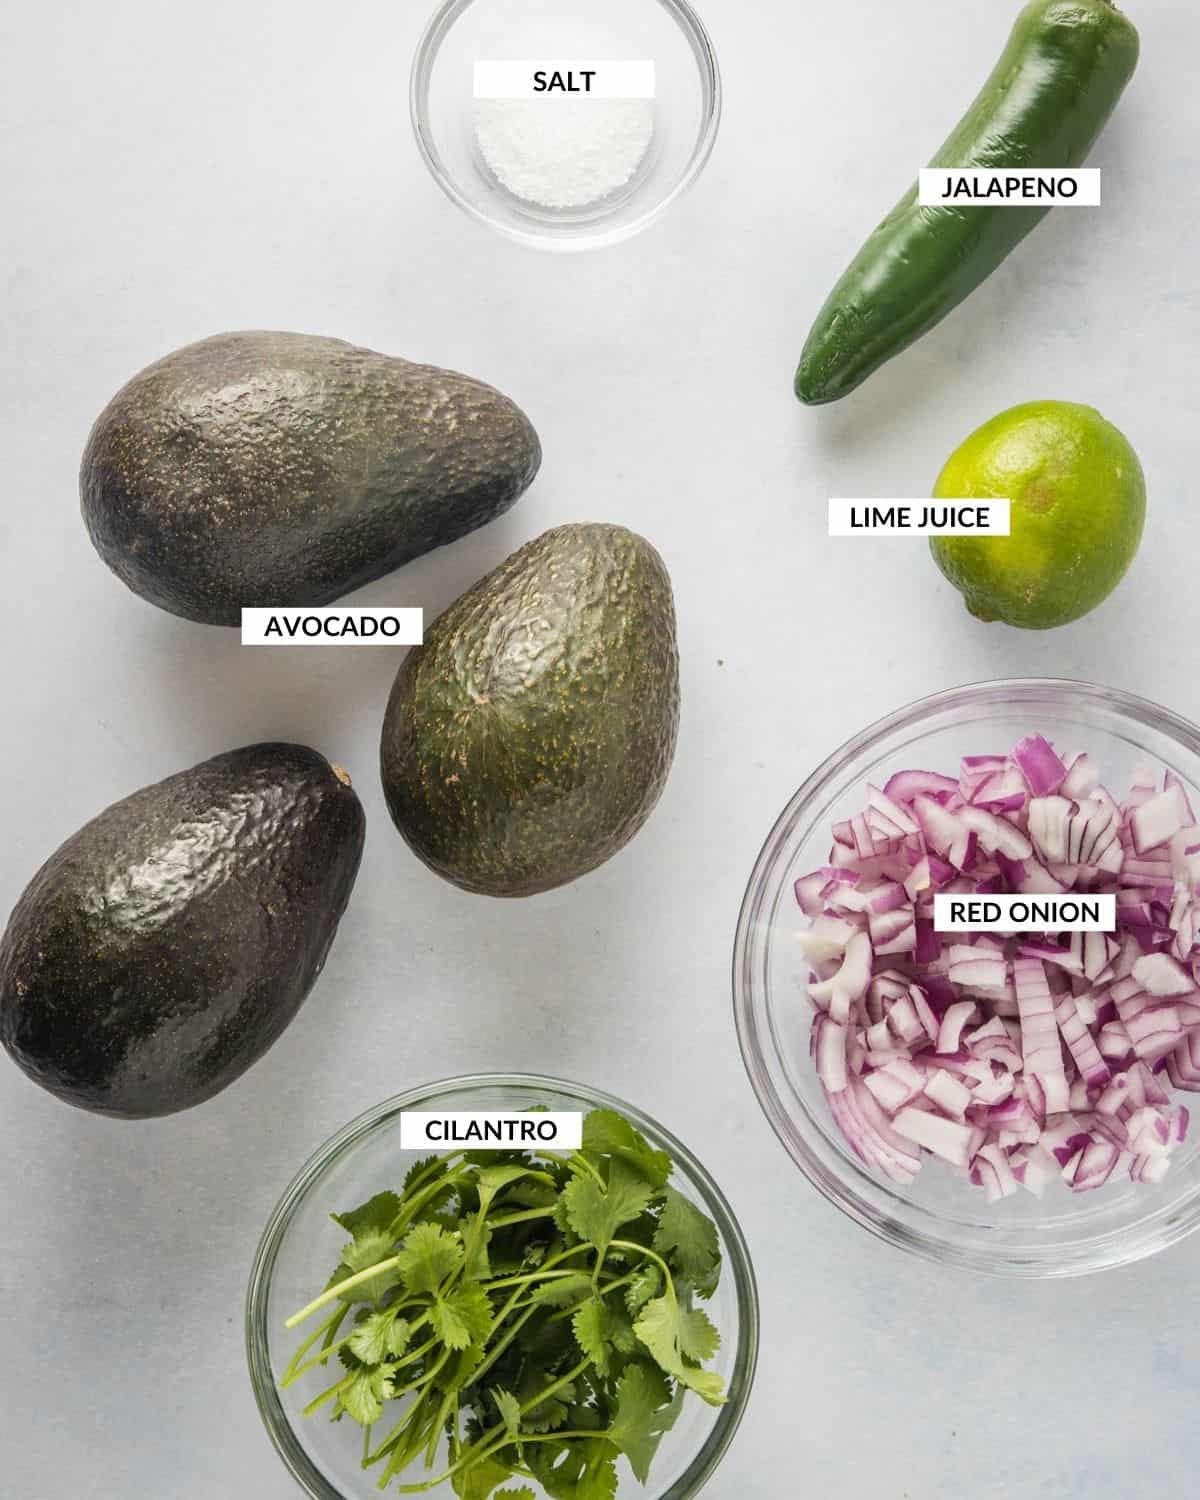 Labeled image showing ingredients for spicy guacamole